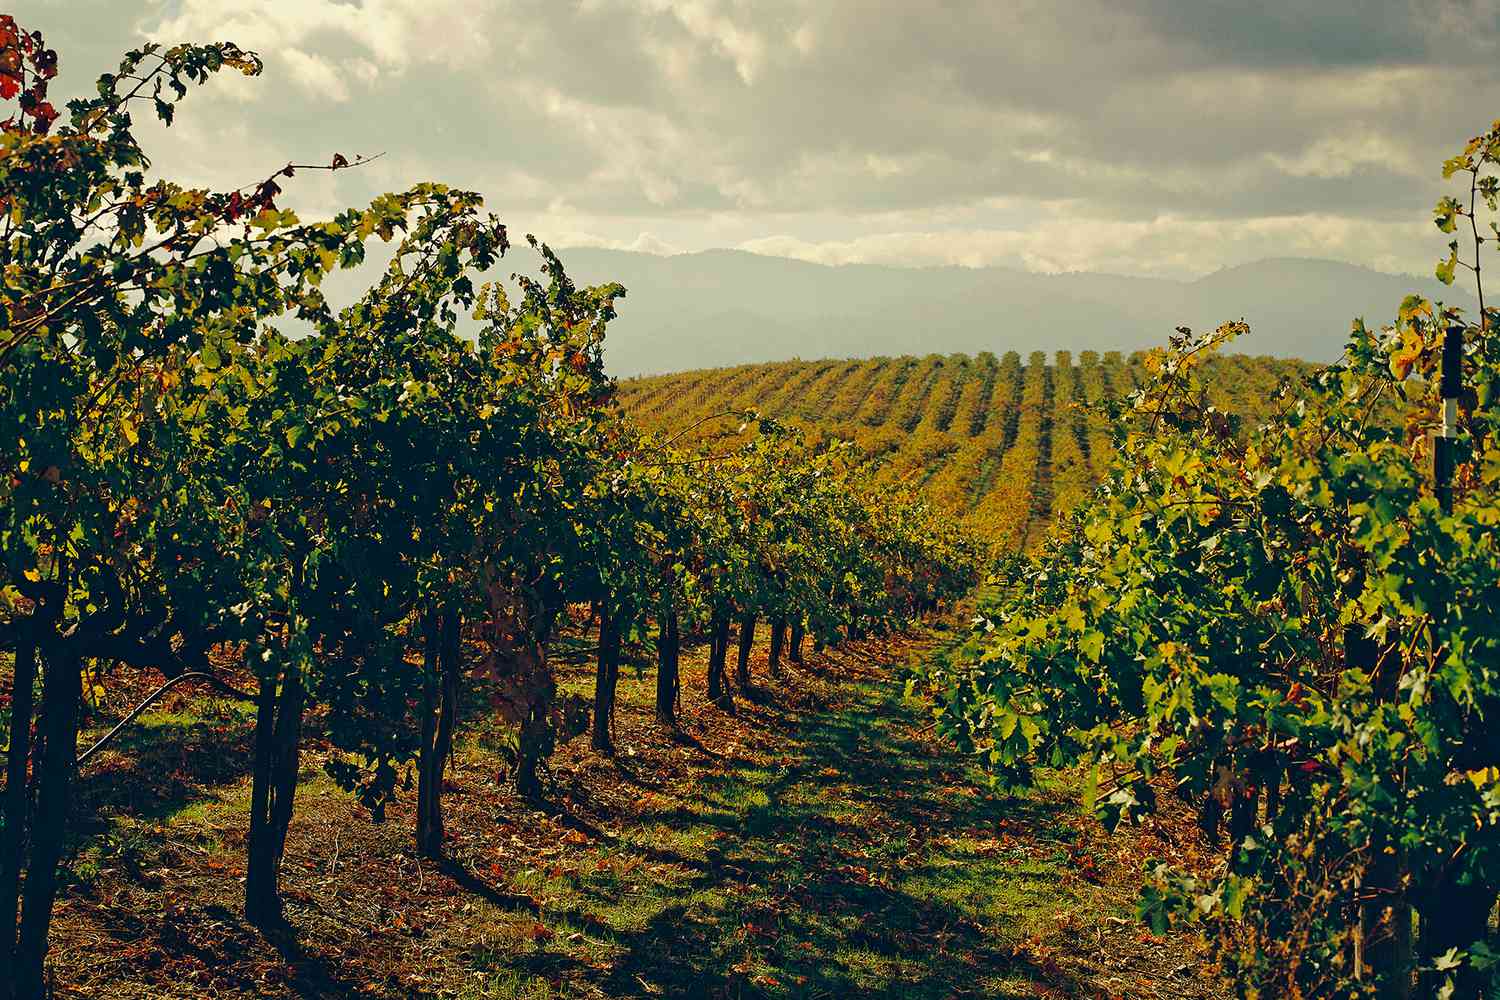 NAPA VALLEY AND THE TYPES OF WINES THAT COME FROM THERE